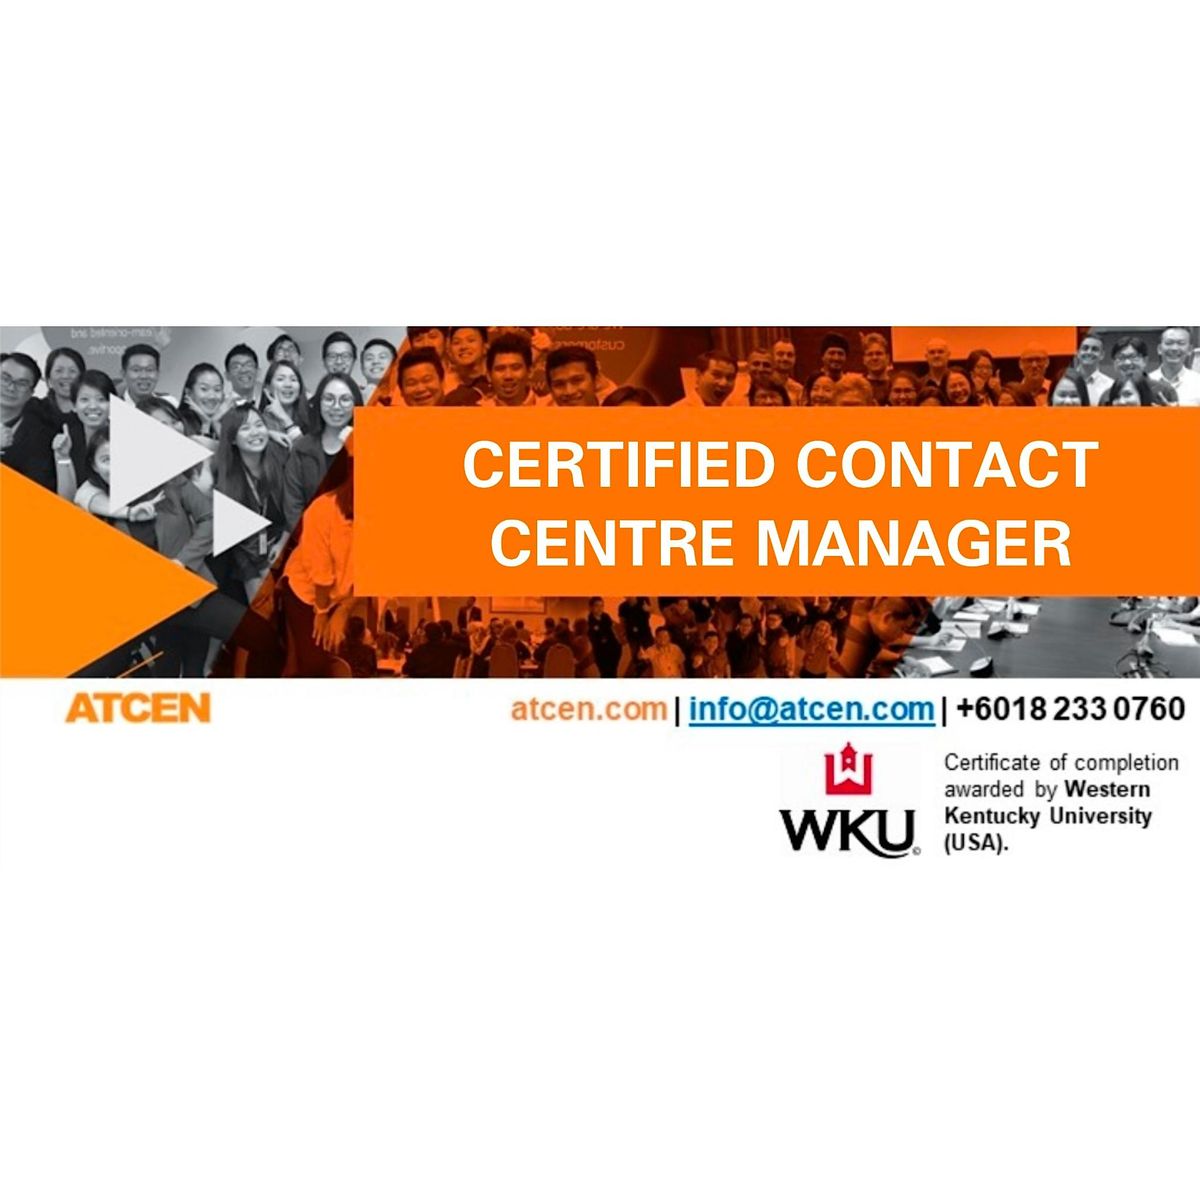 Certified Contact Centre Manager (CCCM)